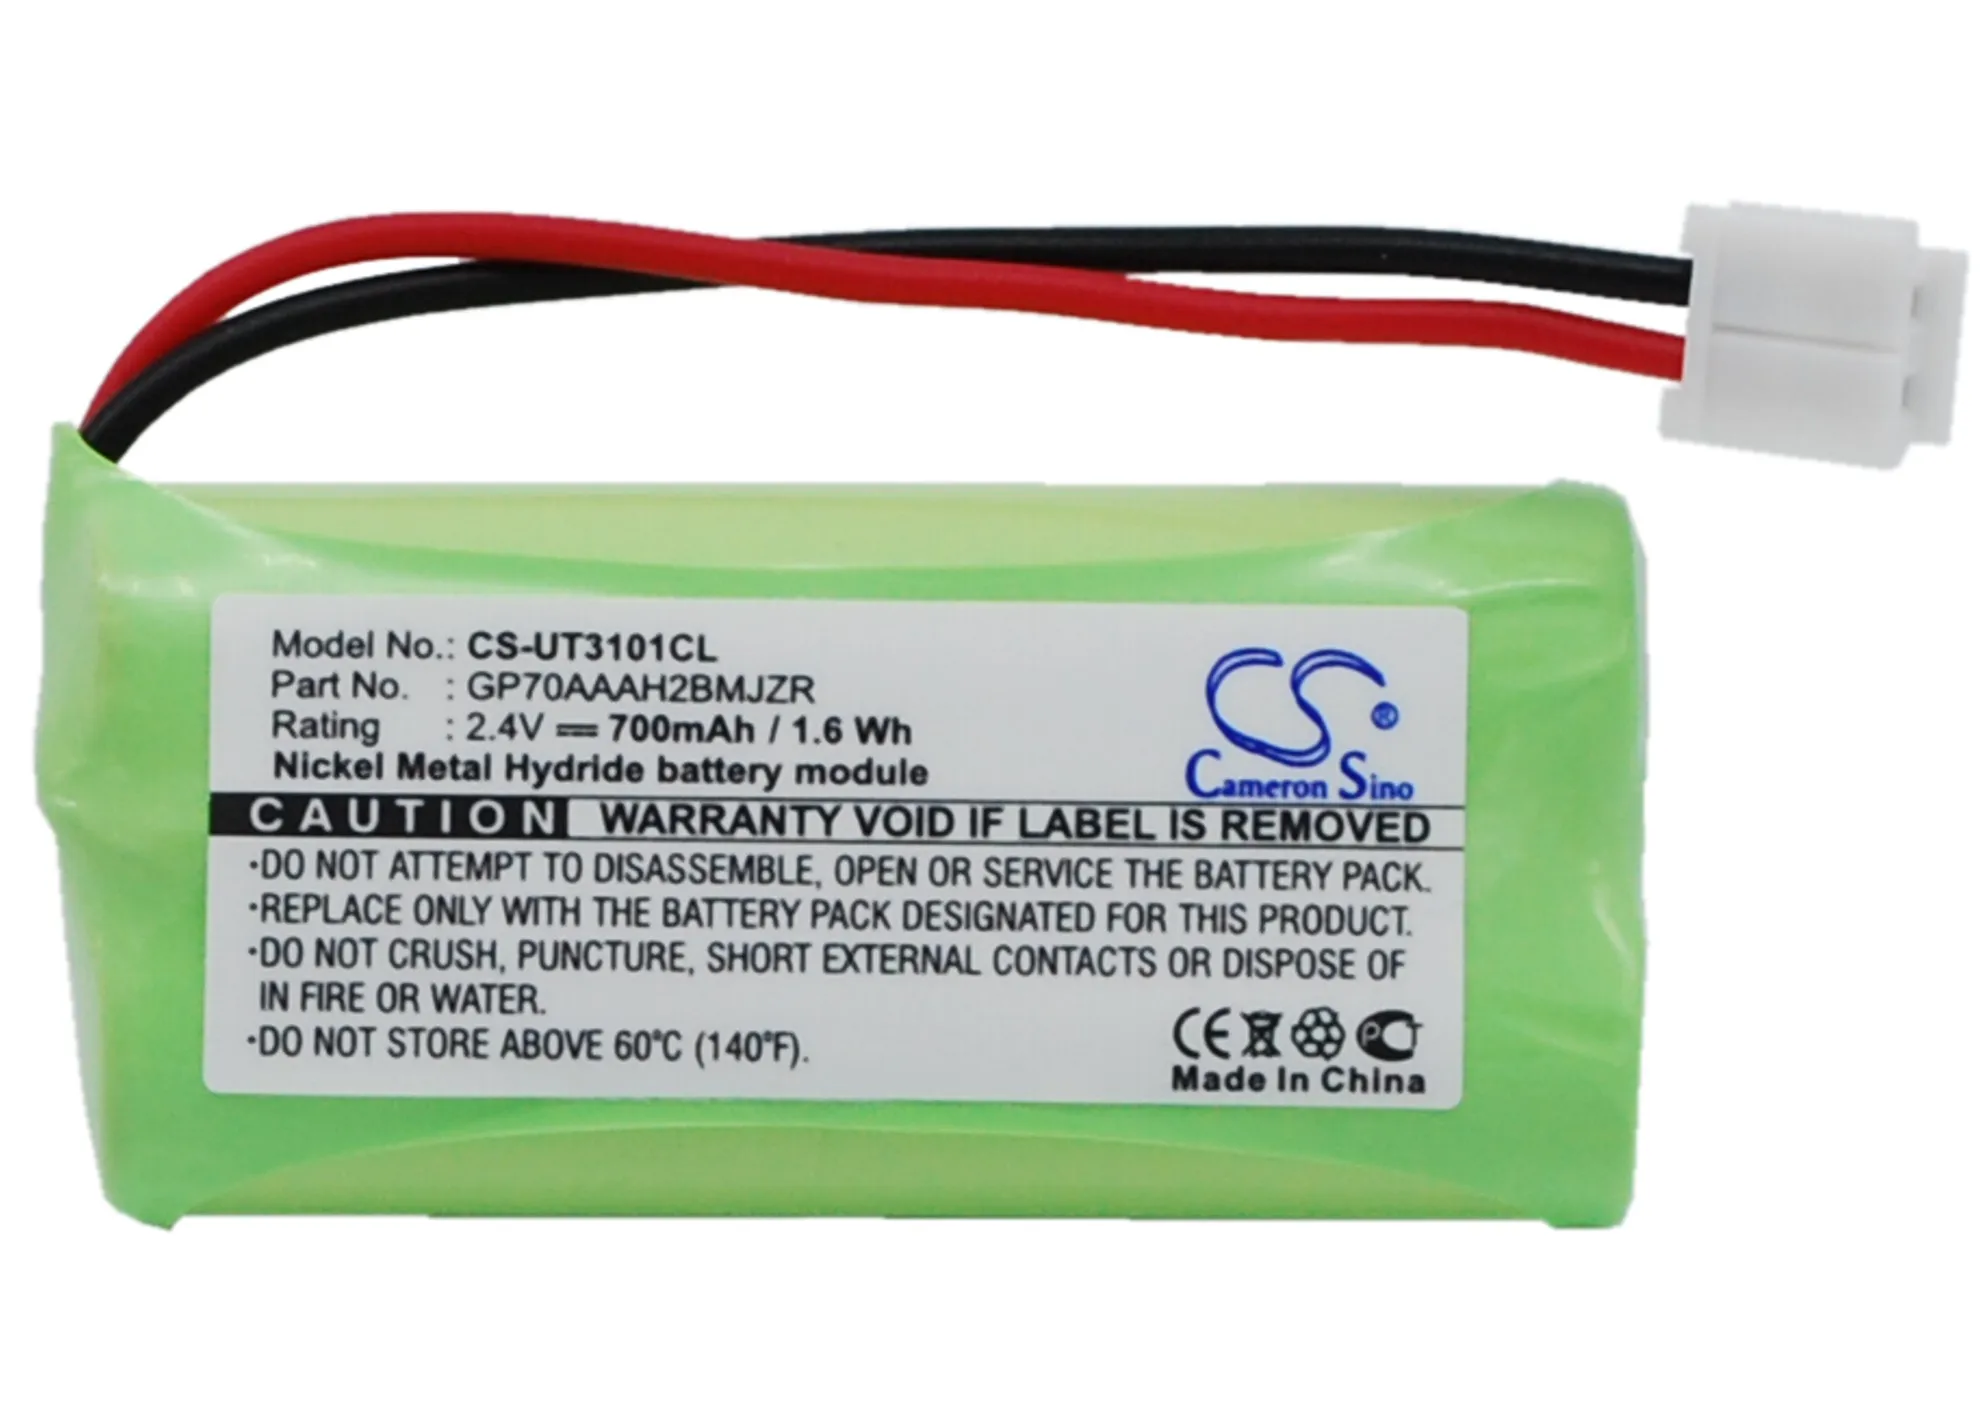 

Cameron Sino Cordless Phone Replacement Ni-MH Battery 700mAh For Clarity 7704901, 77049-01, C Free Tools